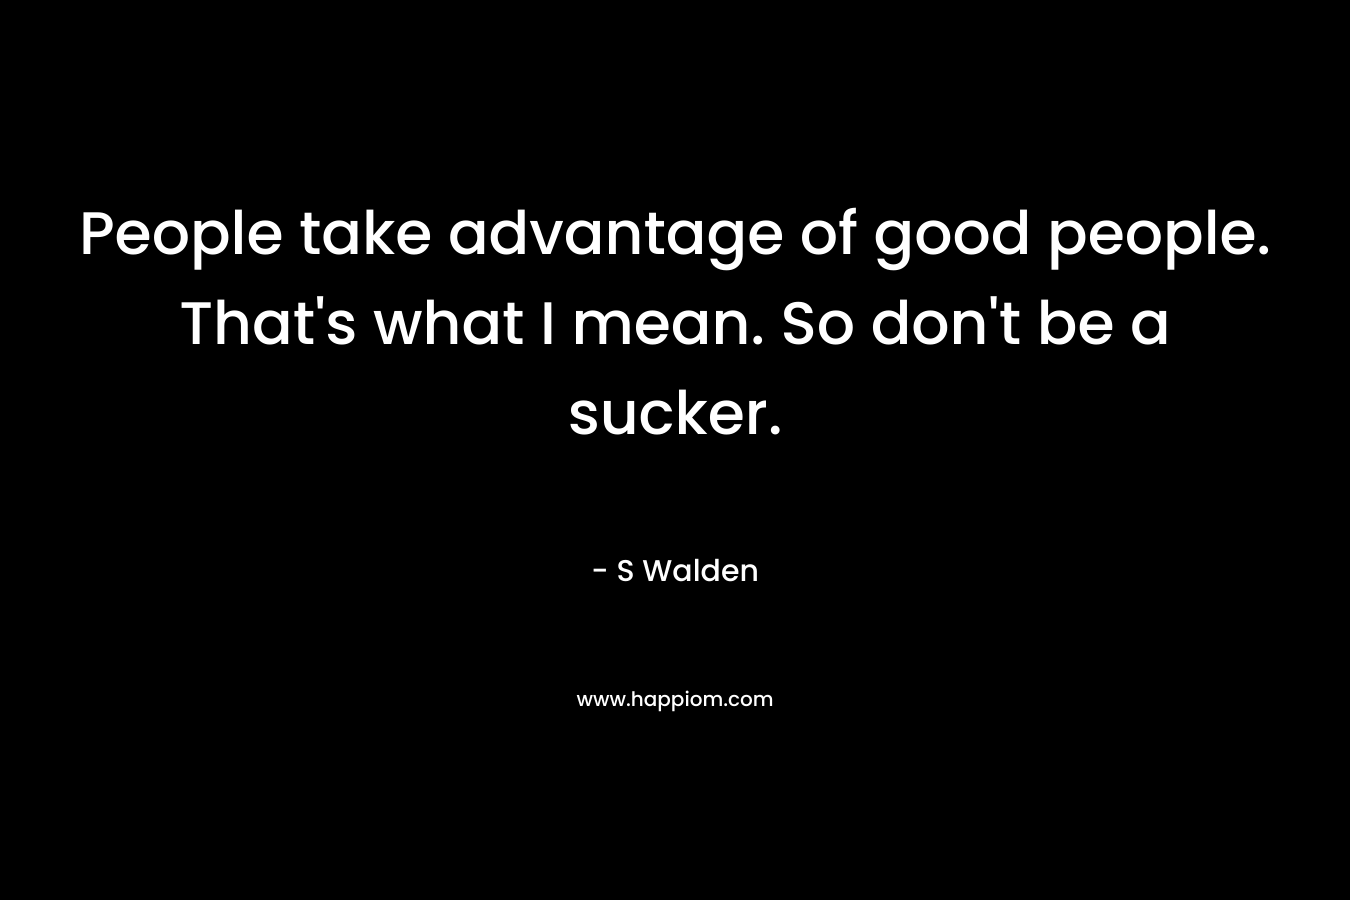 People take advantage of good people. That's what I mean. So don't be a sucker.